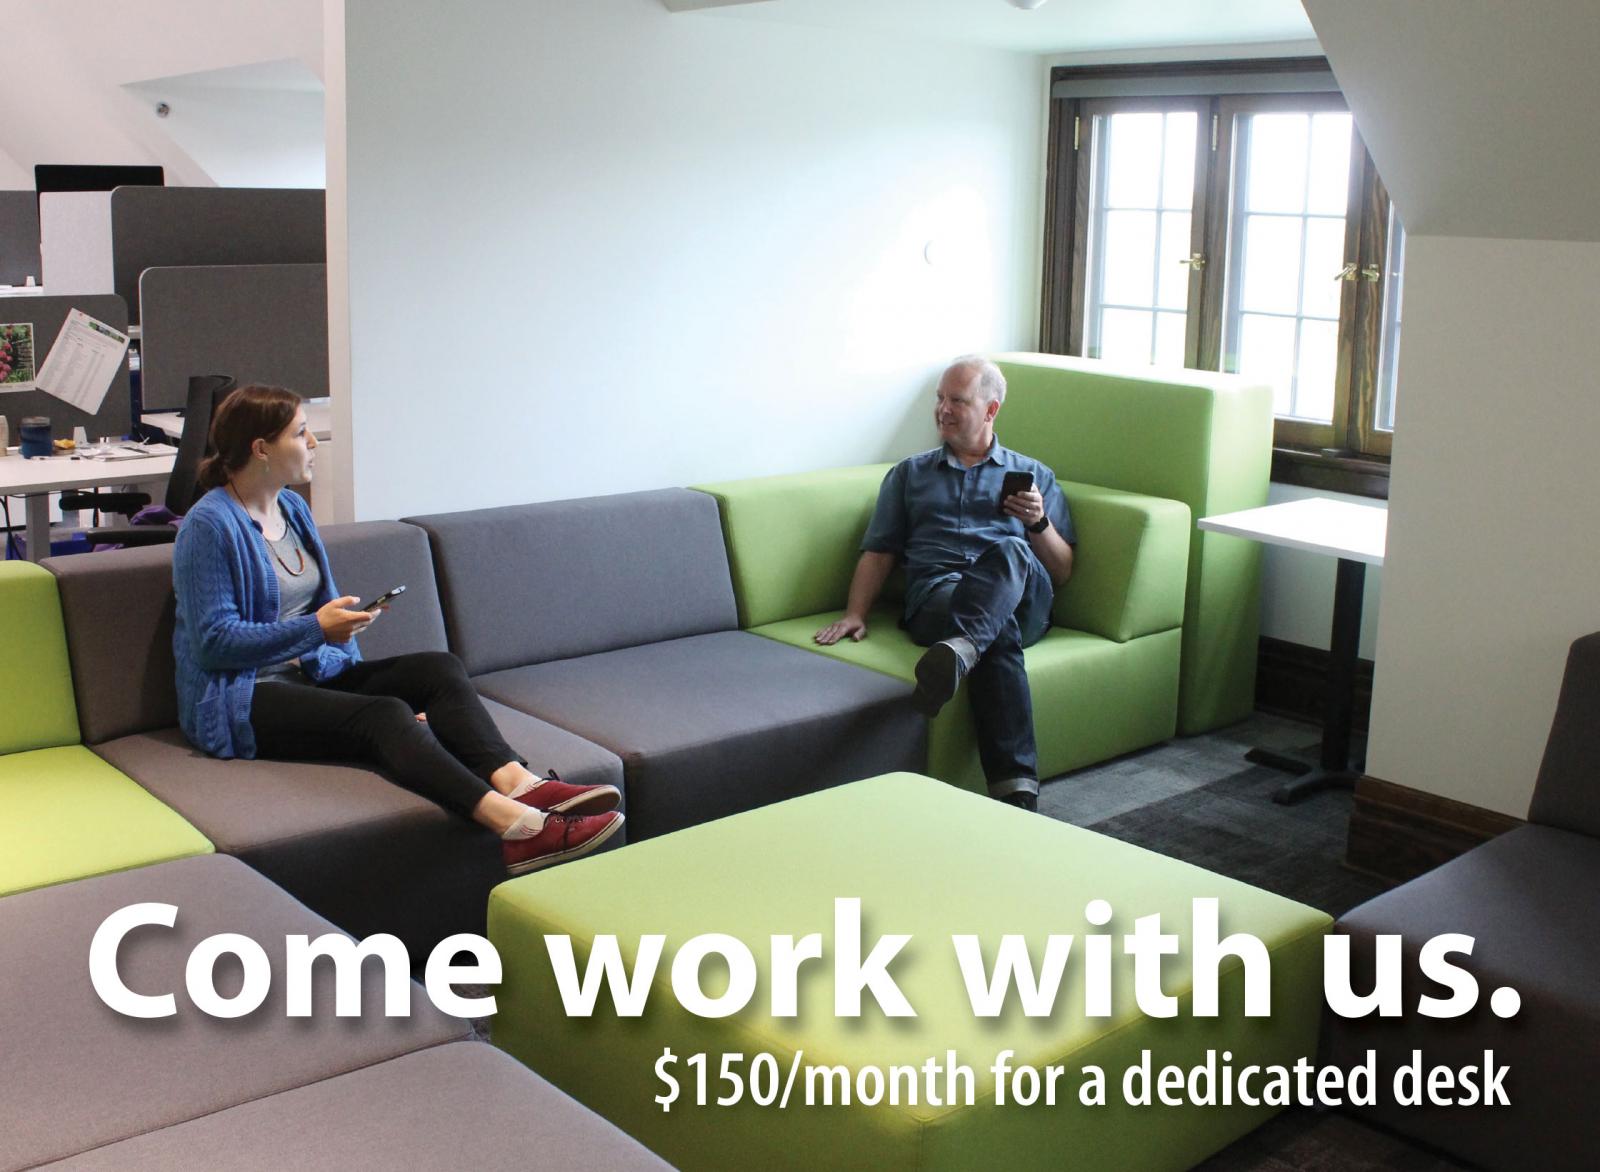 Come work with us. ($150/month for a dedicated desk)